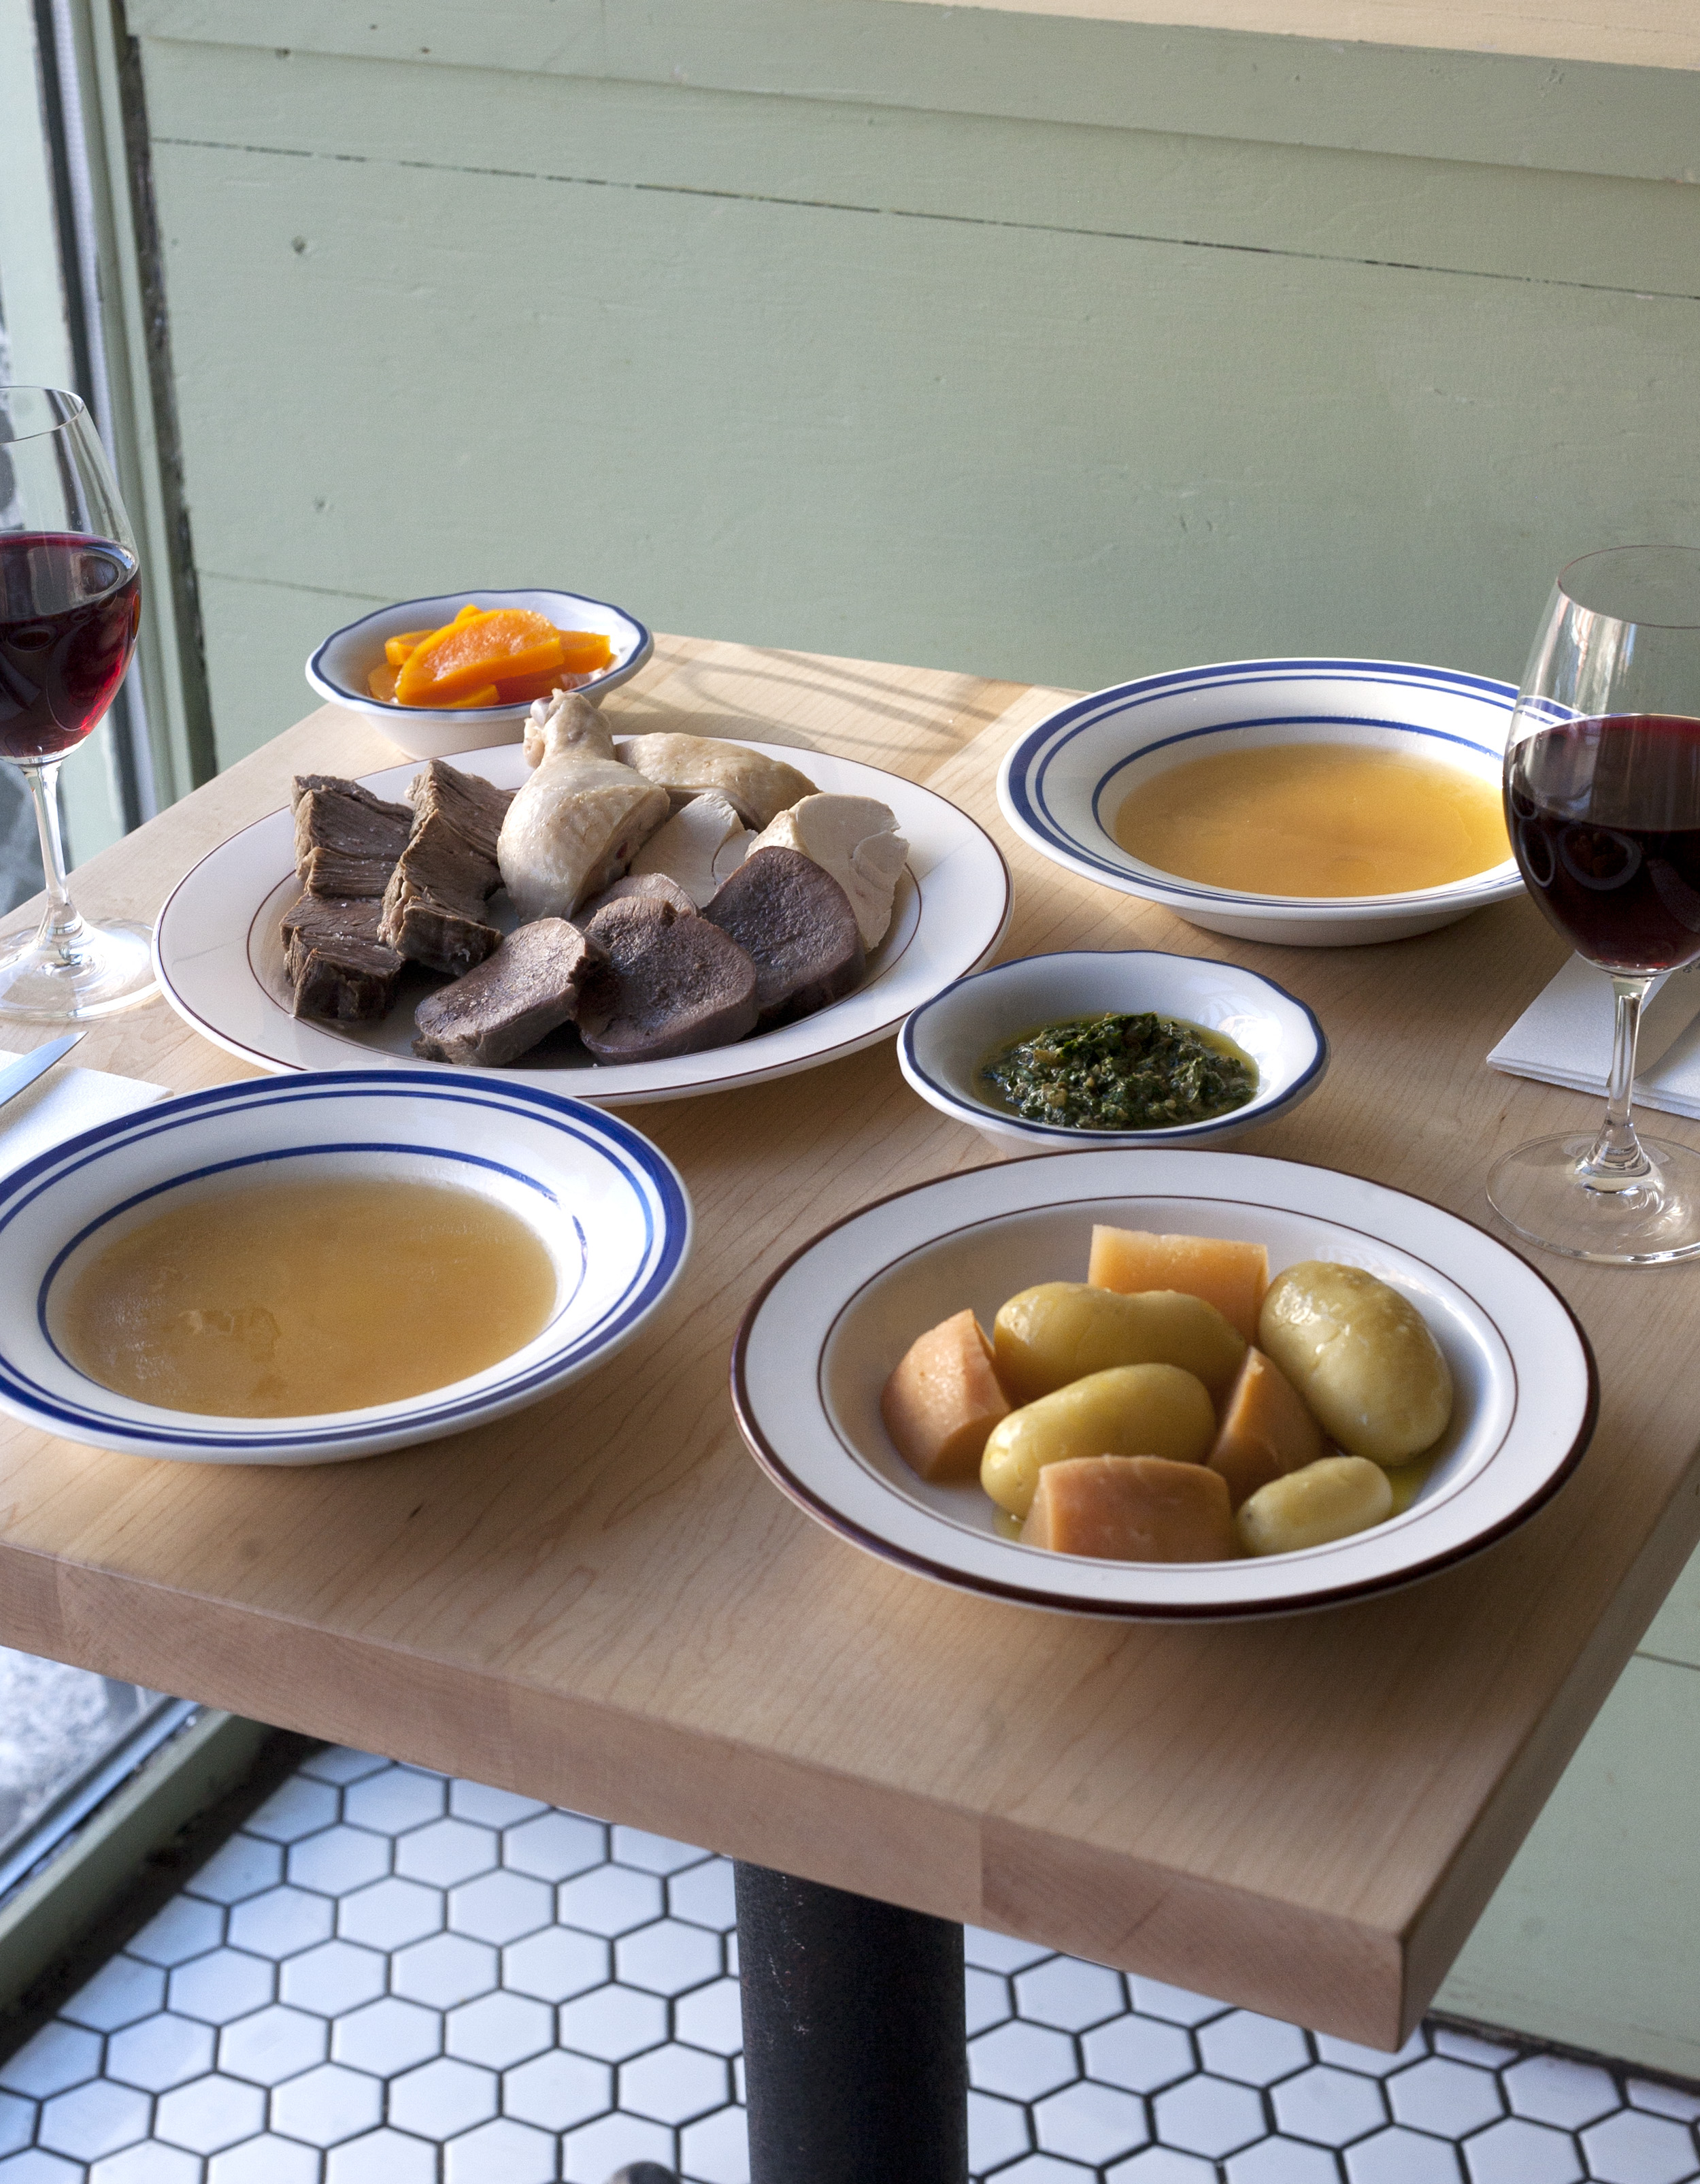 wood table with two glasses of wine, two bowls of soup and other plates with potatoes and meat